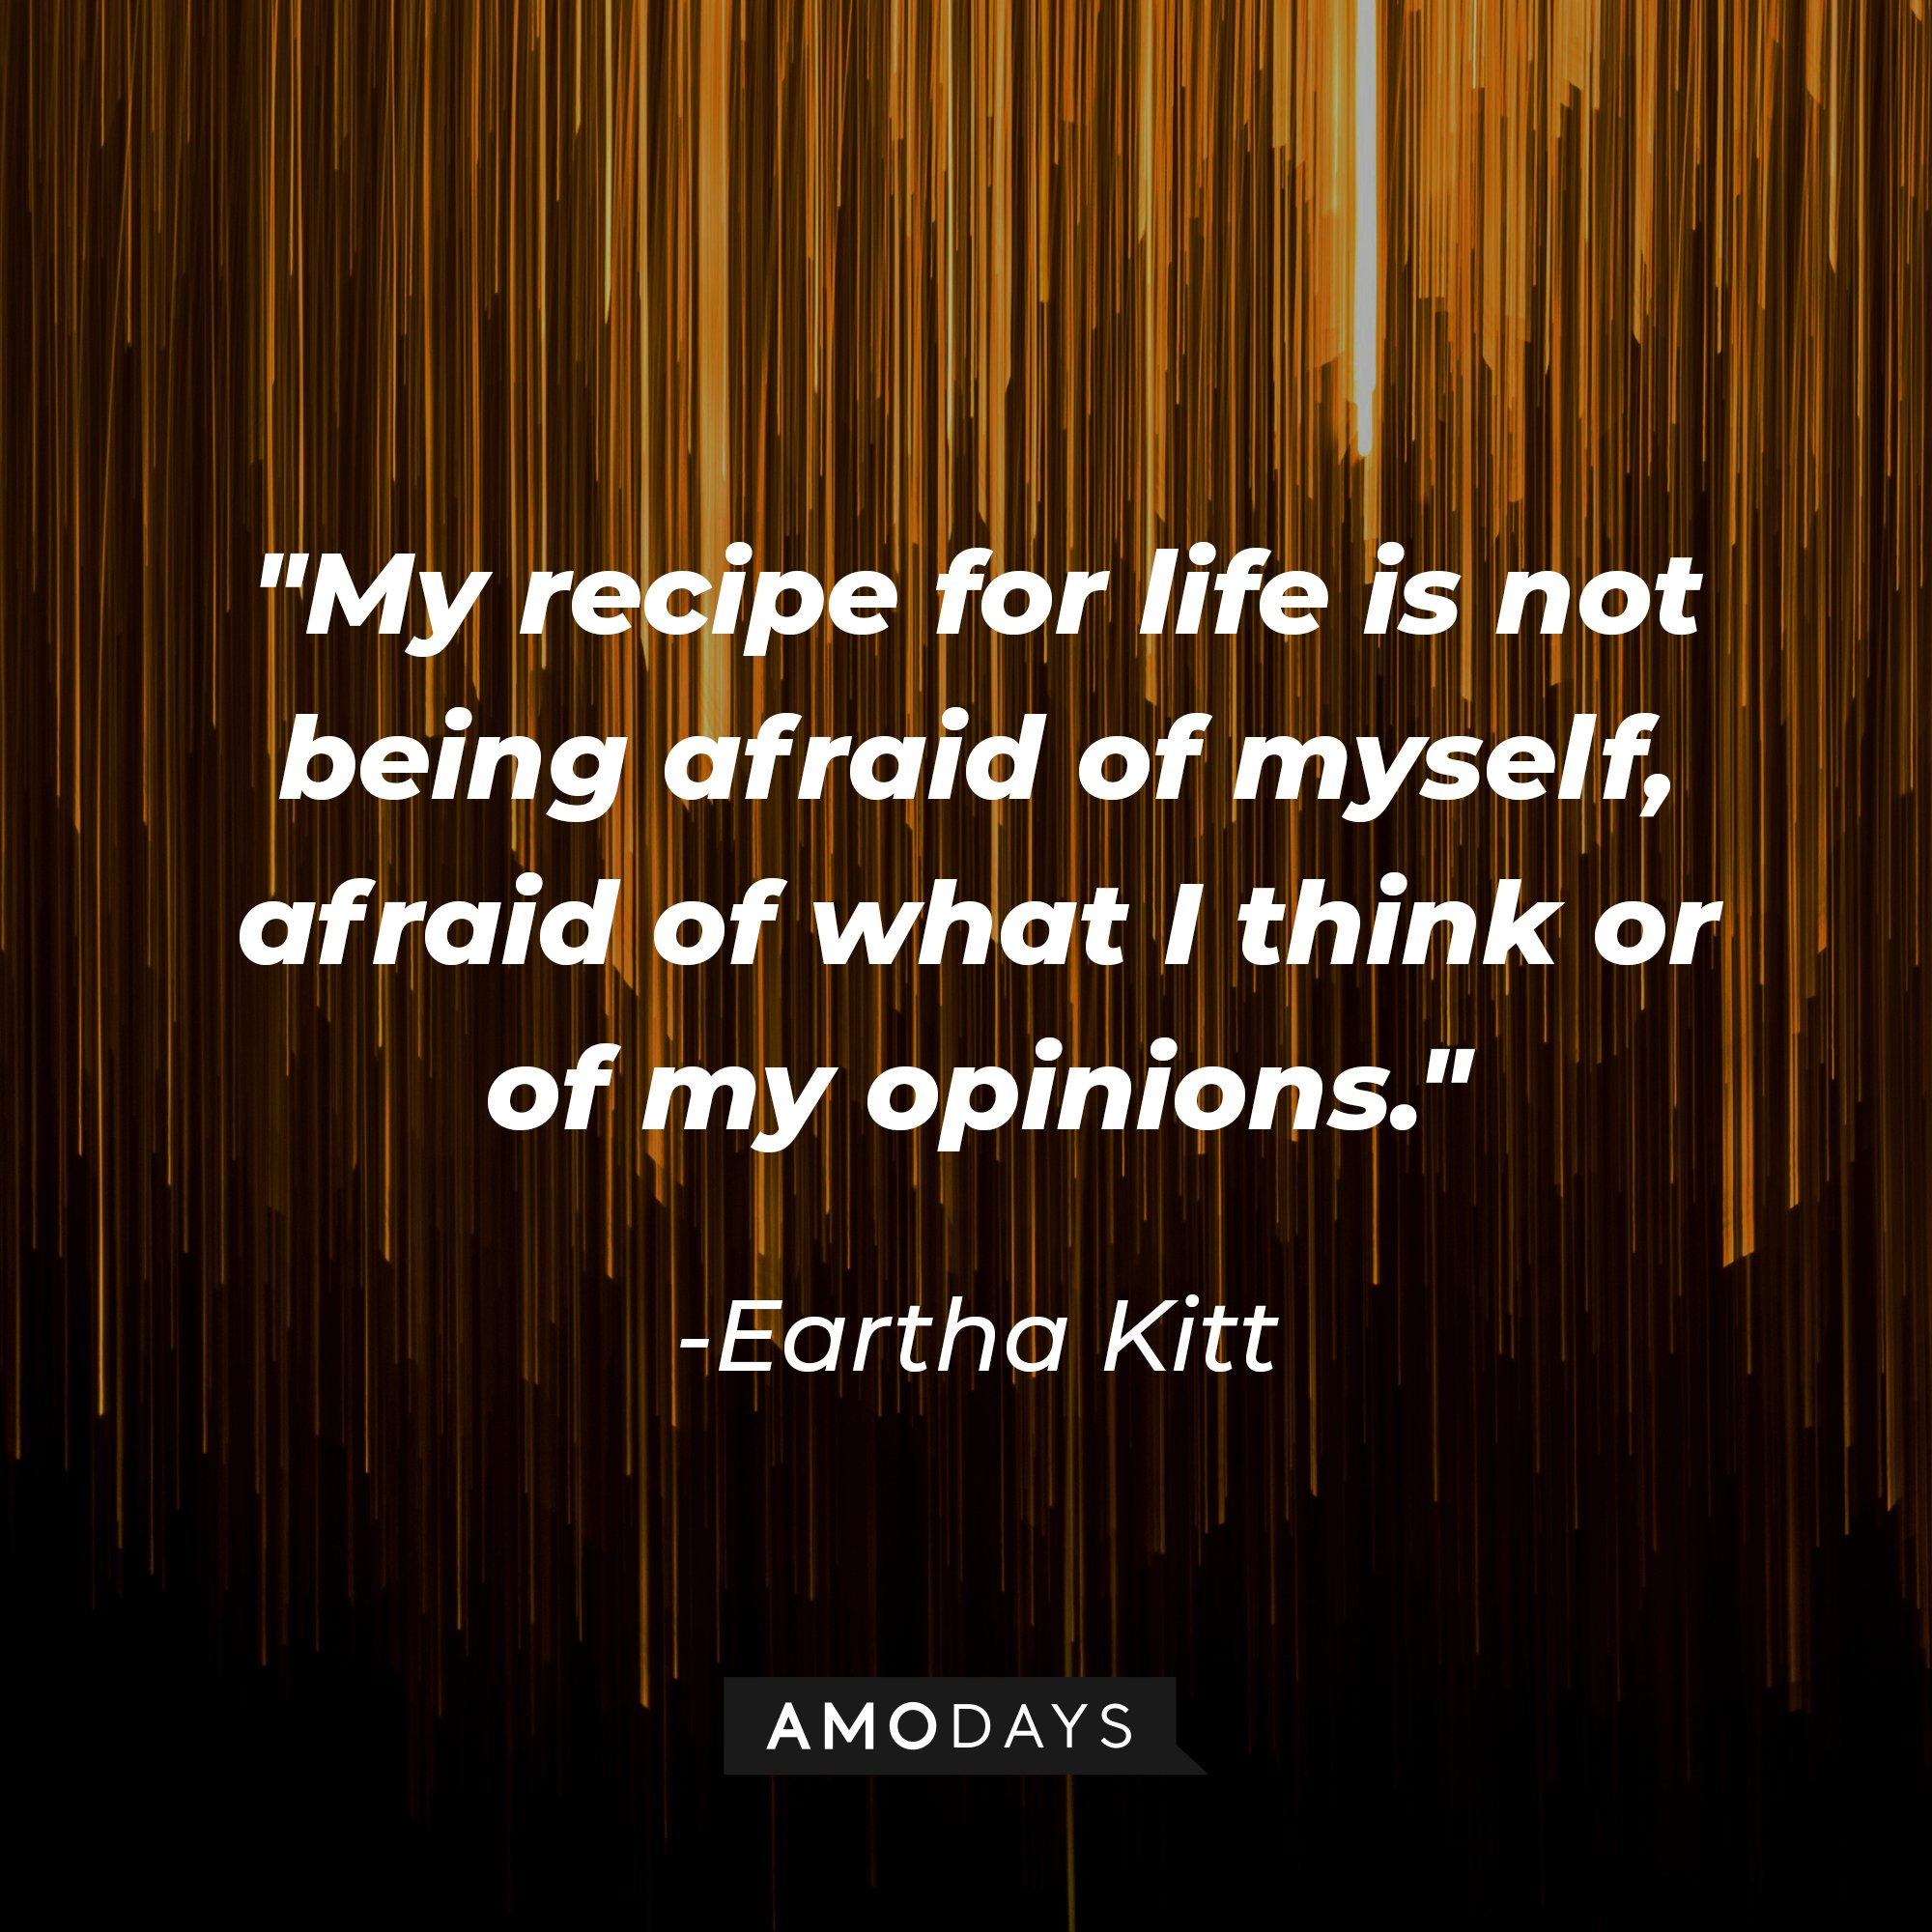 Eartha Kitt’s quote: "My recipe for life is not being afraid of myself, afraid of what I think or of my opinions." | Image: AmoDays